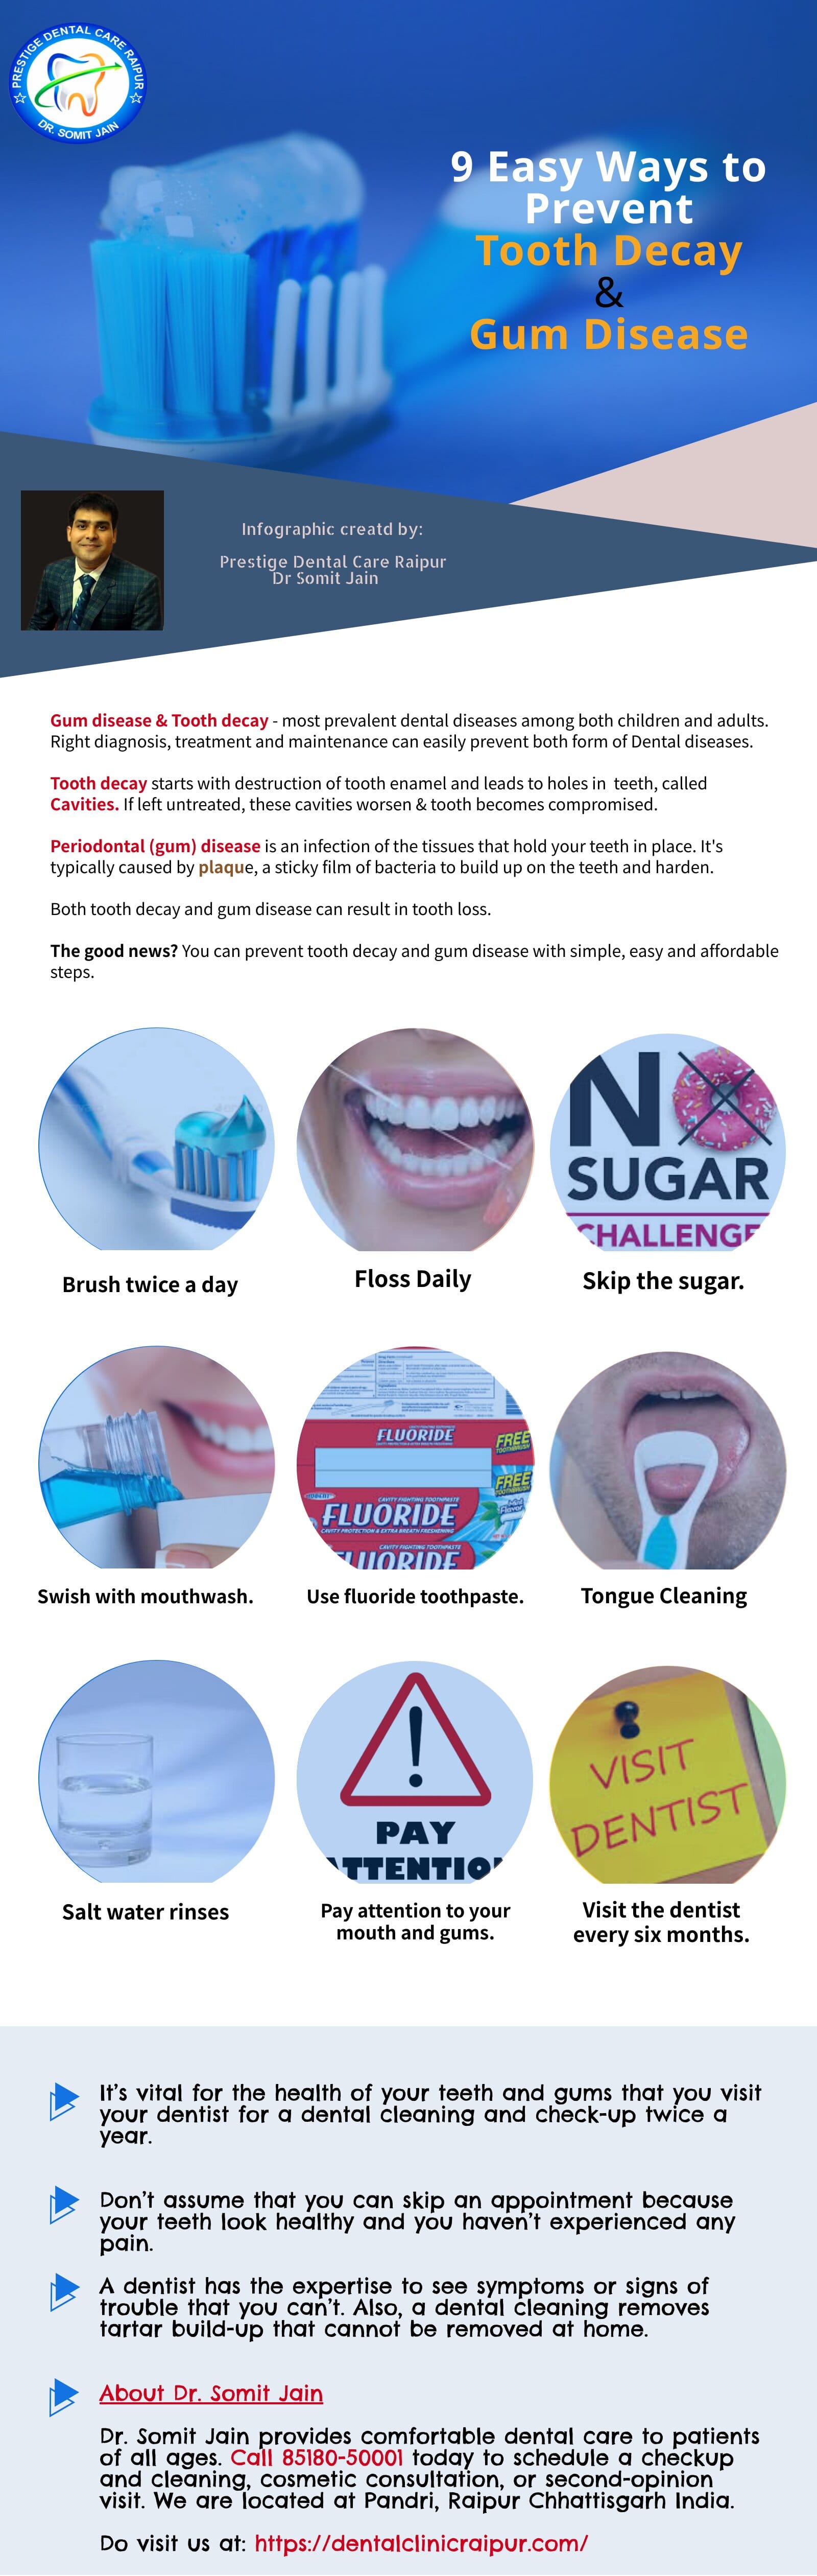 Prevent Tooth Decay & Gum Disease (Home remedies)